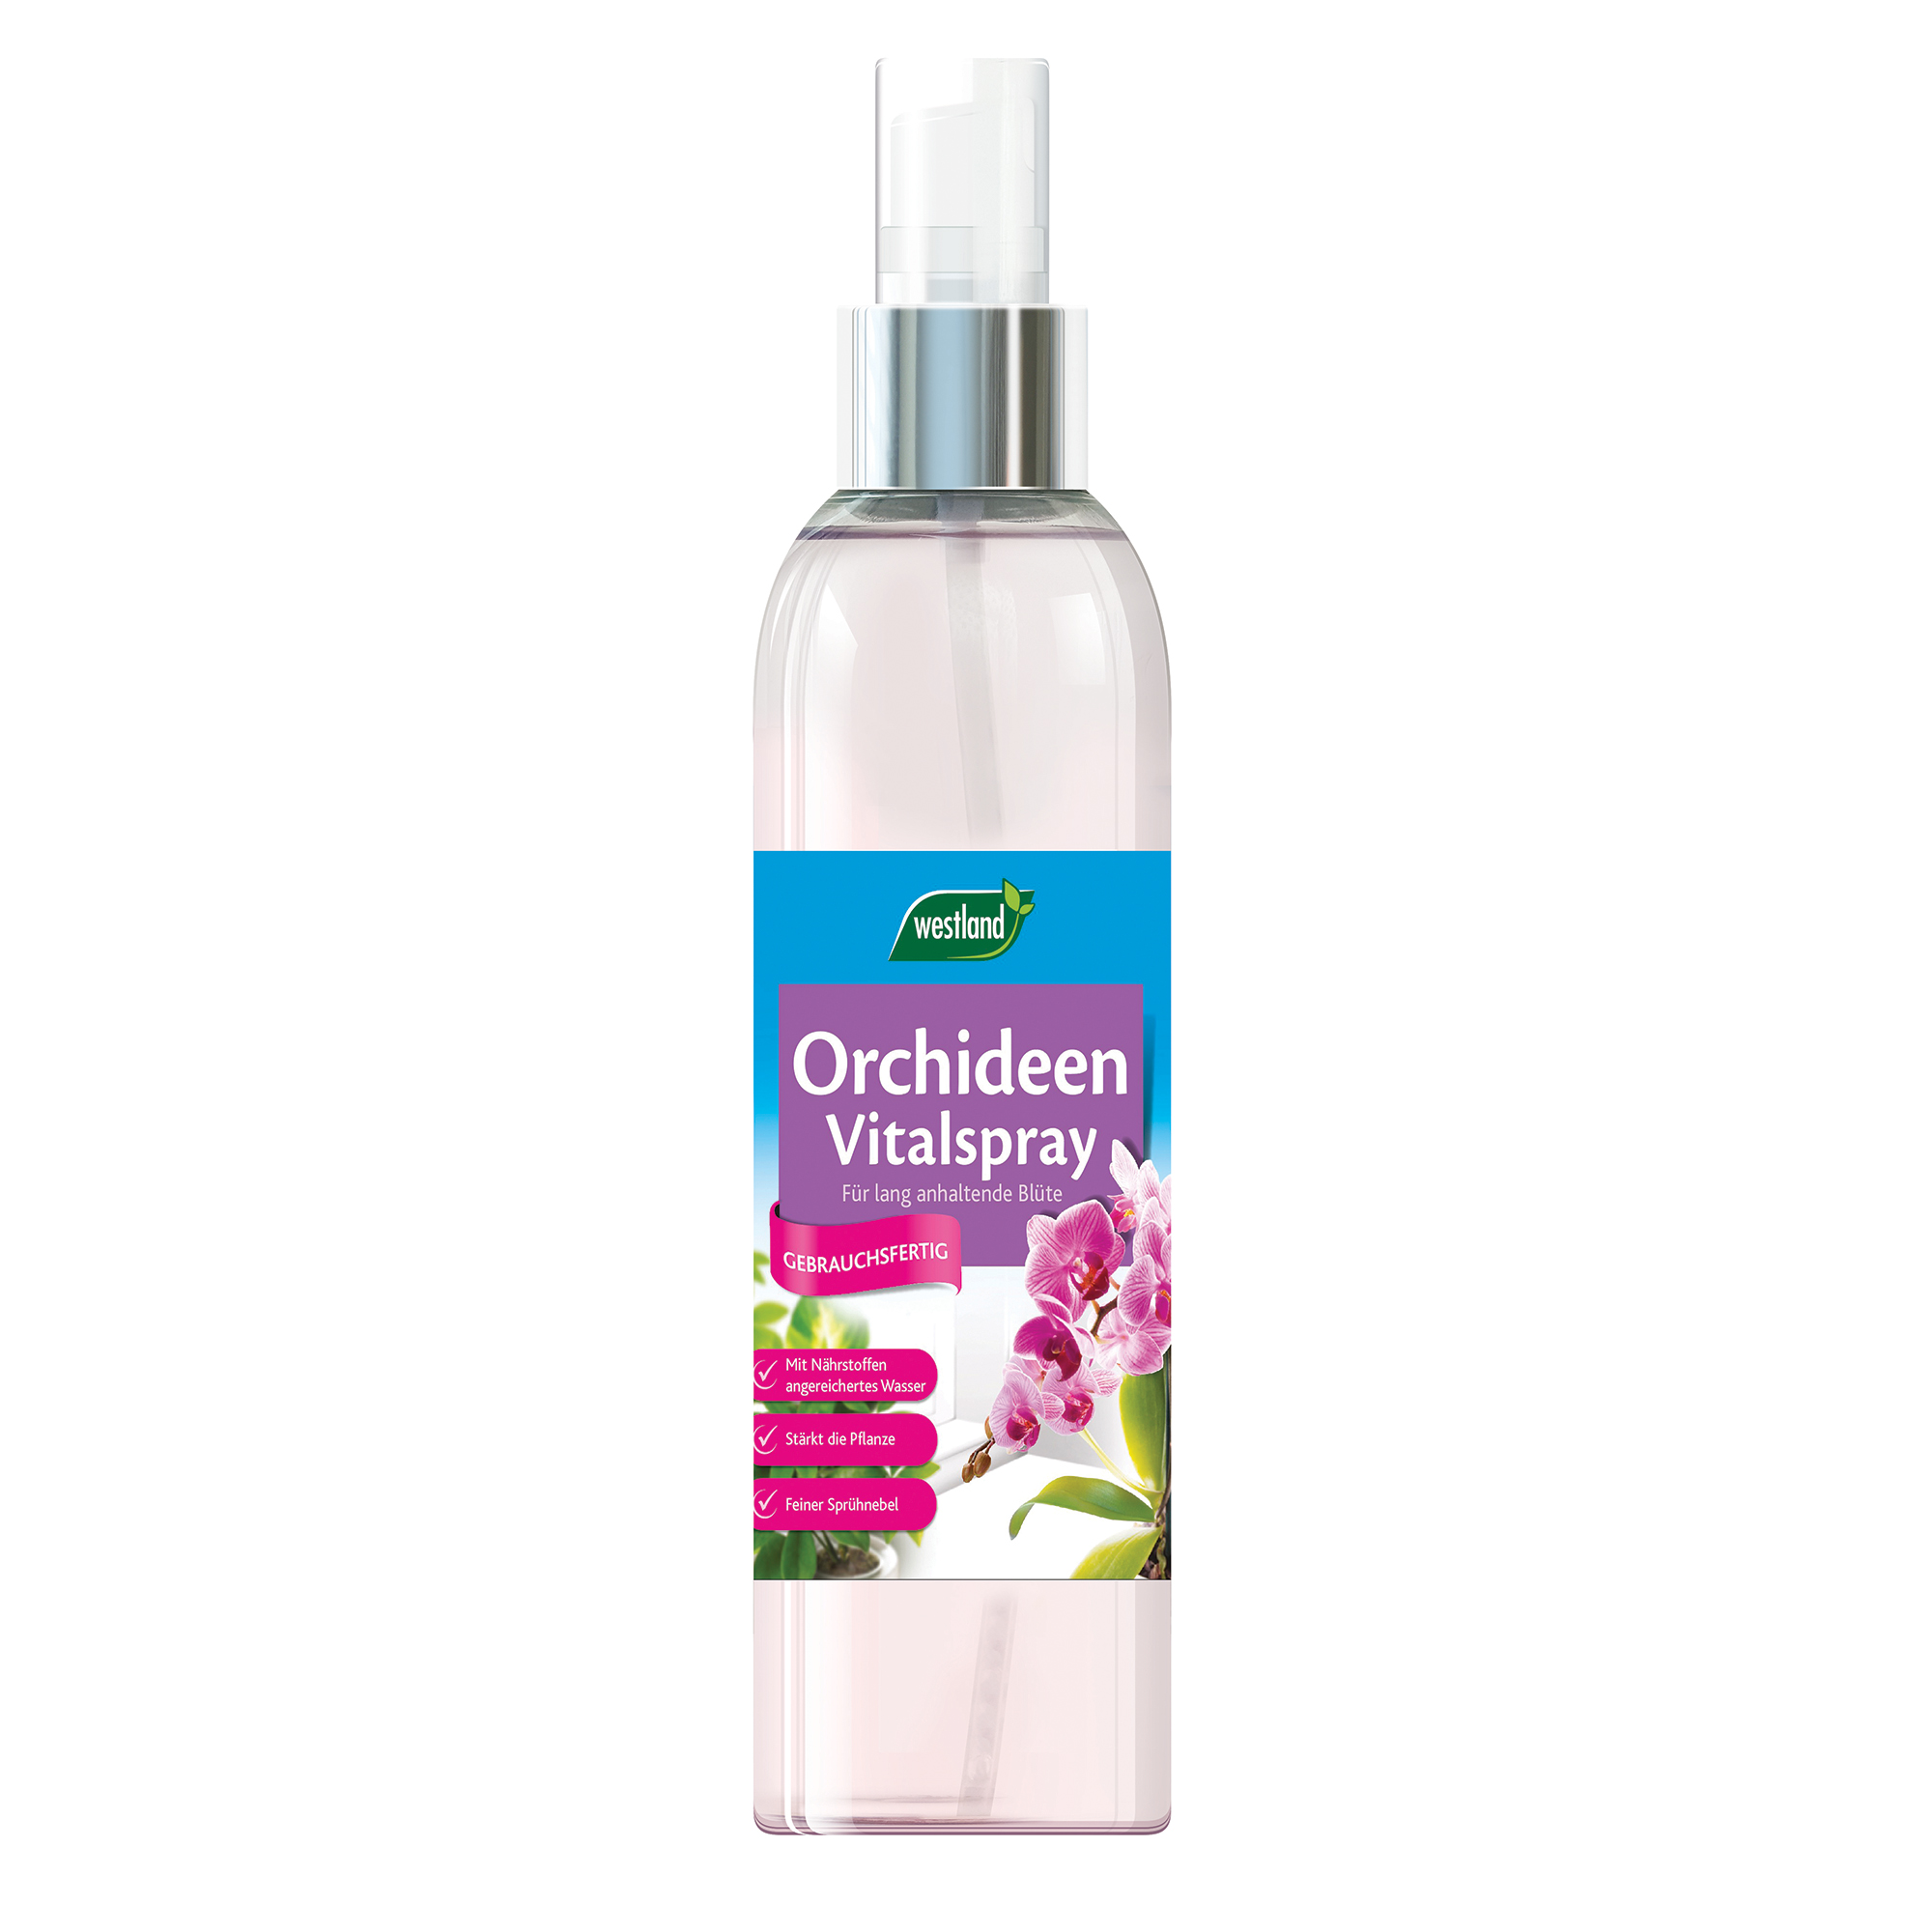 Orchideen Vitalspray 250 ml + product picture